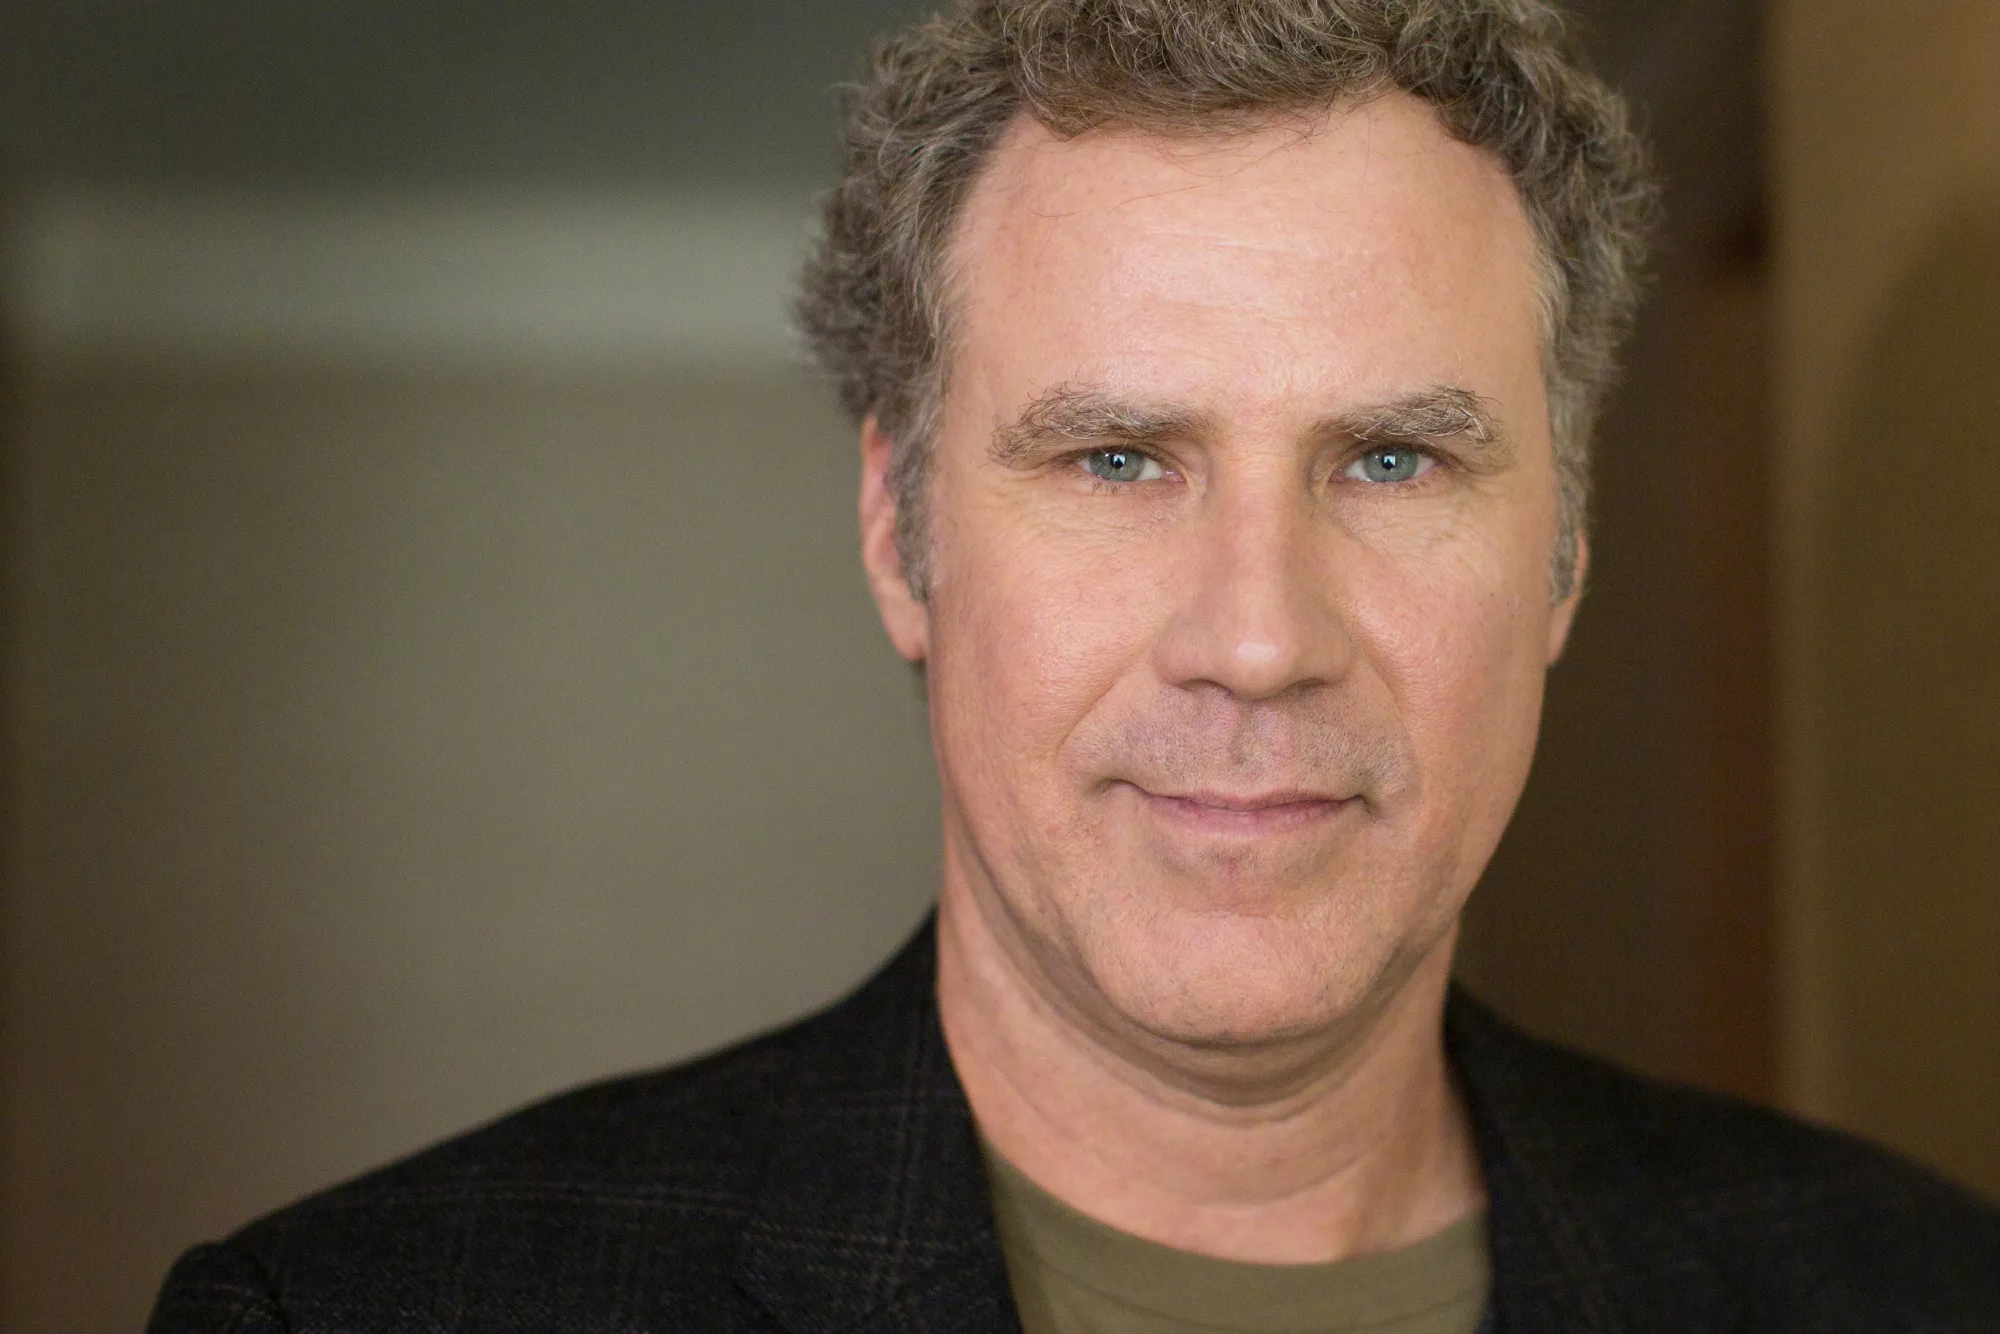 Amazon picks up distribution rights for untitled wedding comedy starring Will Ferrell and Reese Witherspoon | FMV6